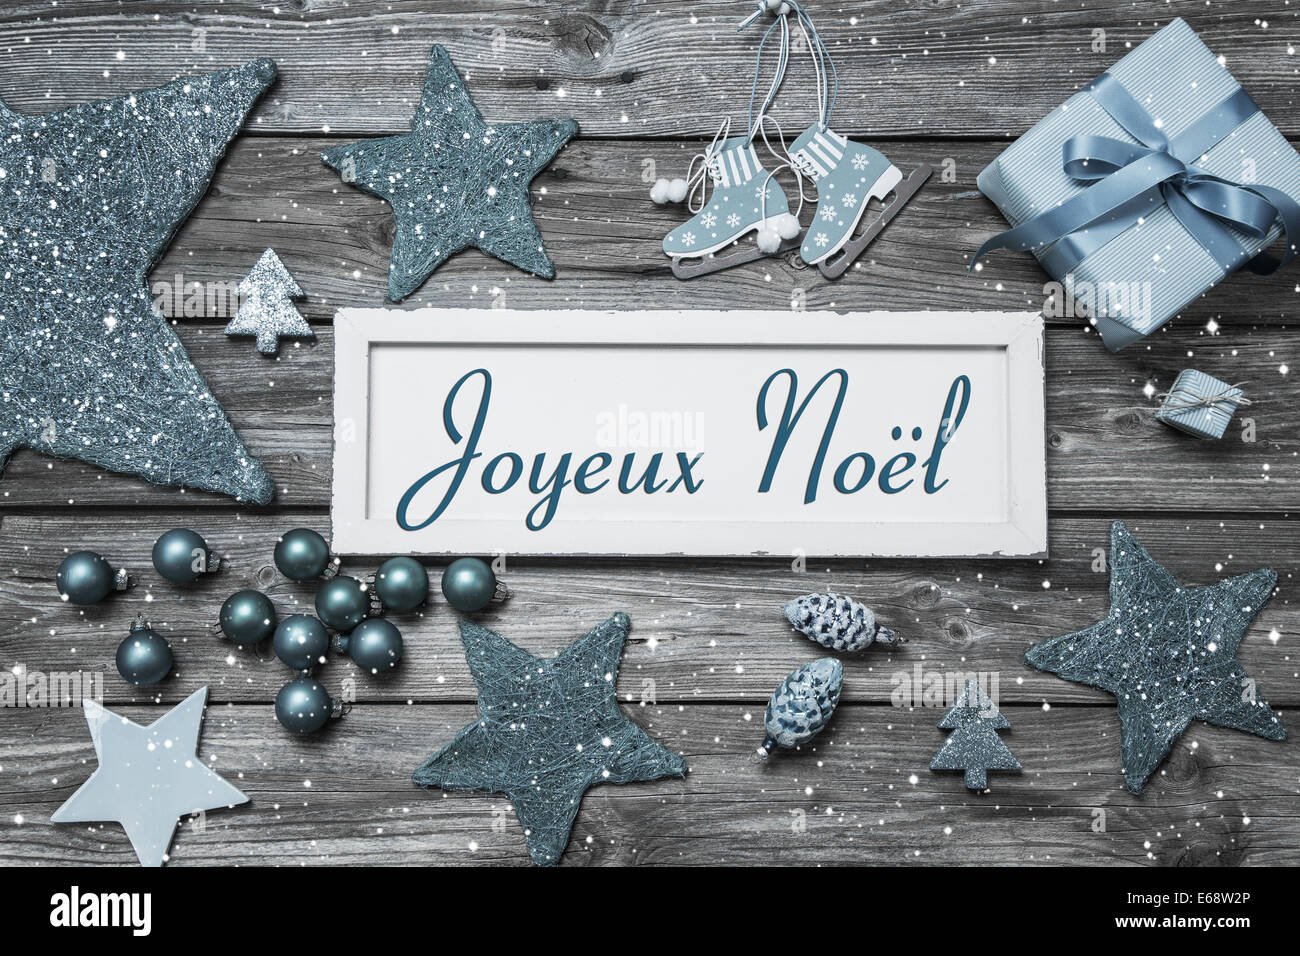 Merry Christmas card in shabby chic style in blue and white with french text on wooden board. Stock Photo